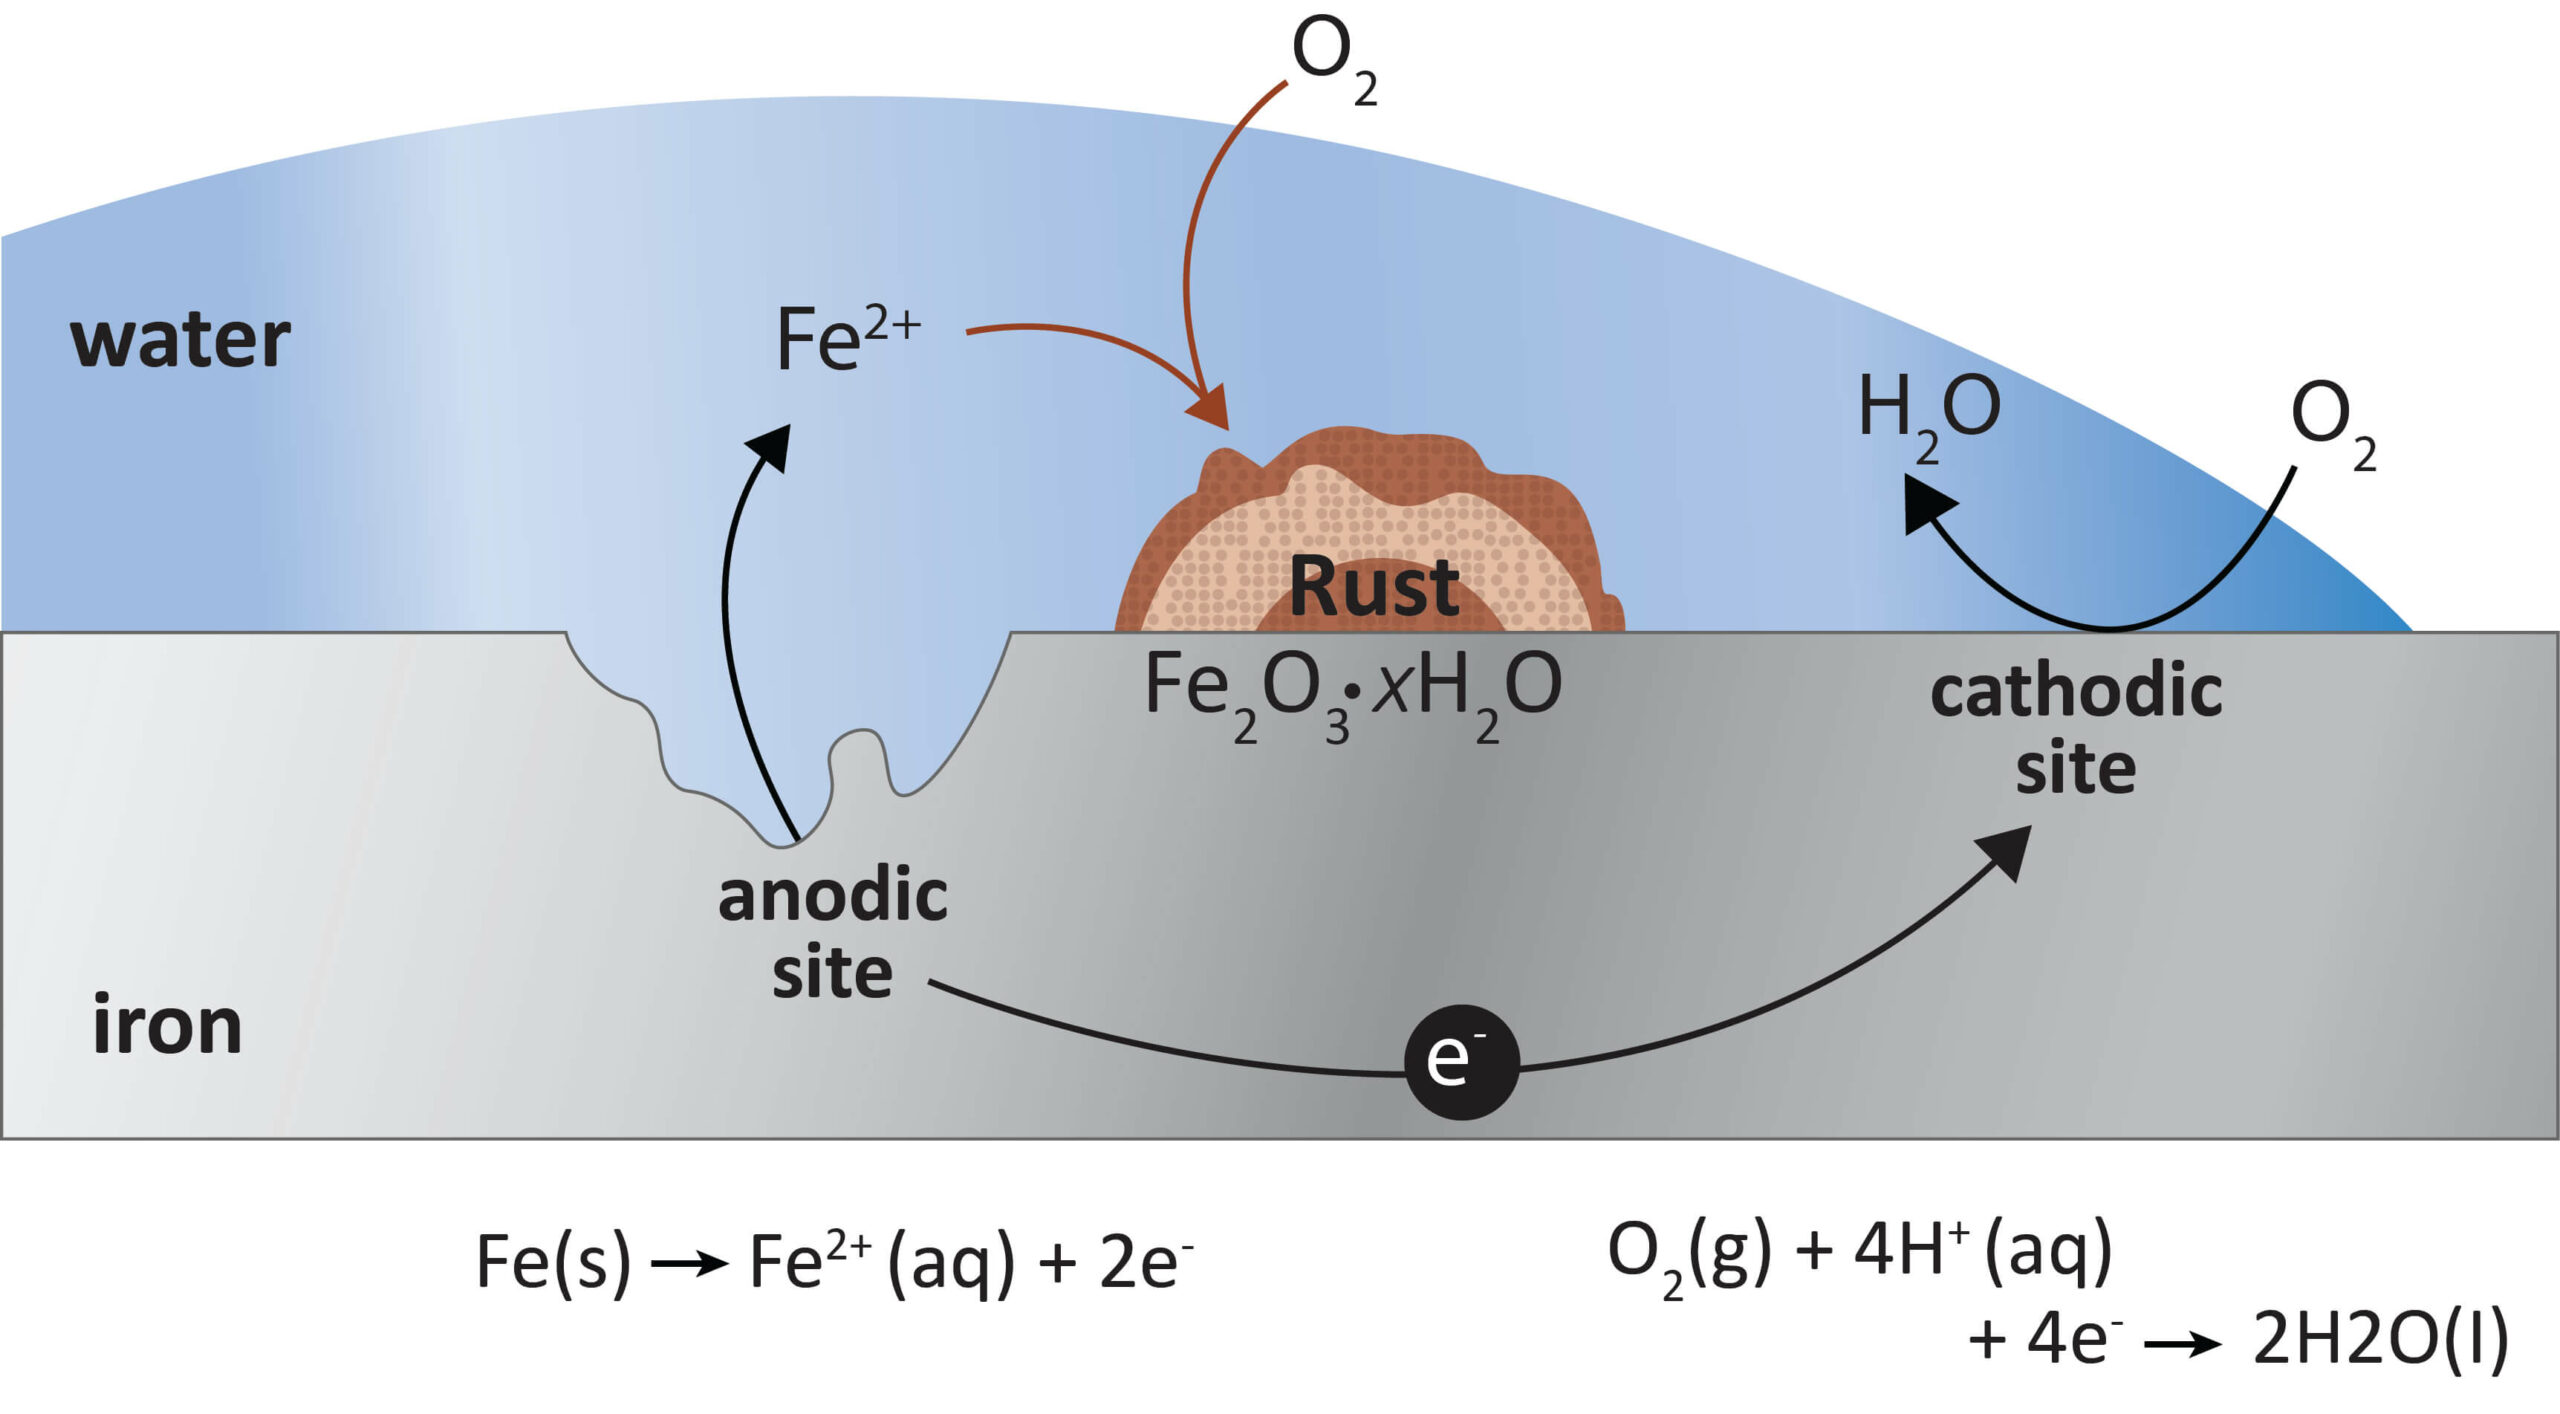 Figure 1. Ferrous surface reacting with air and moisture to cause rusting and degradation.